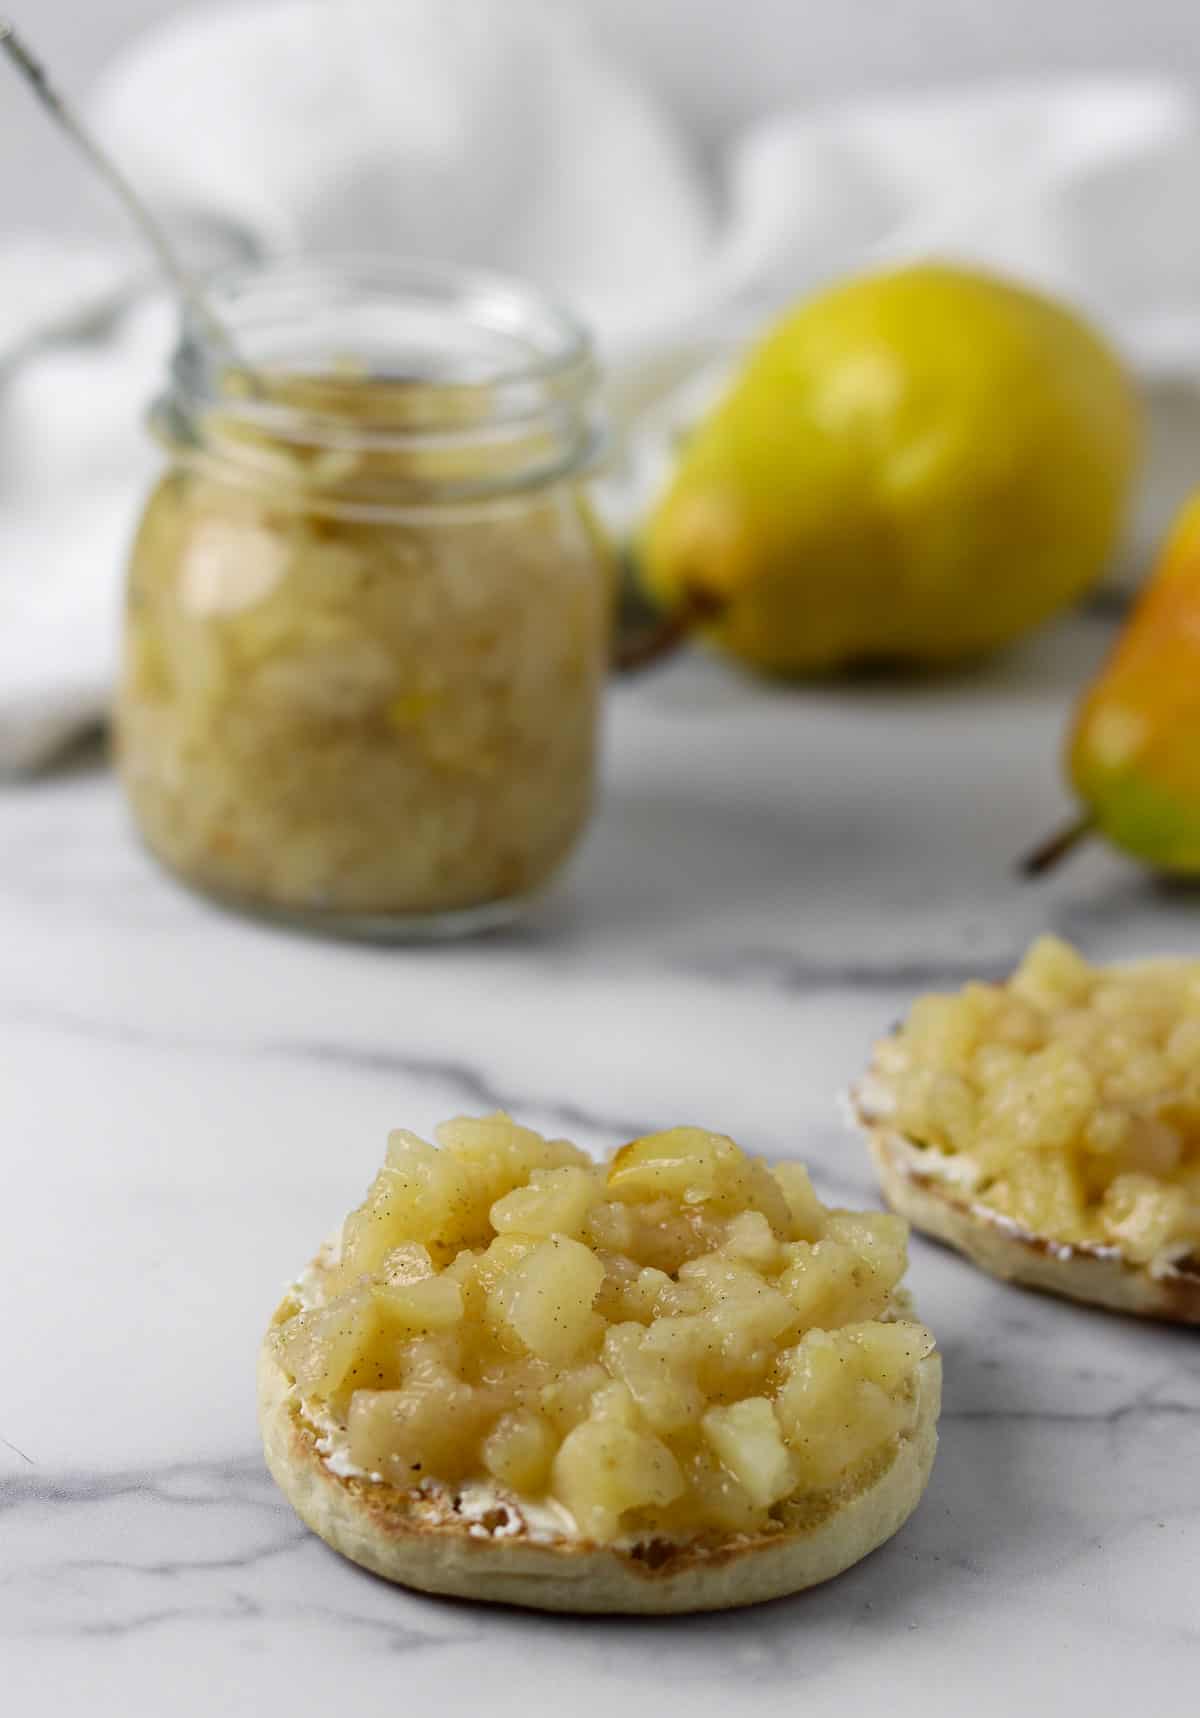 Pear compote on an English muffin on a marble surface.